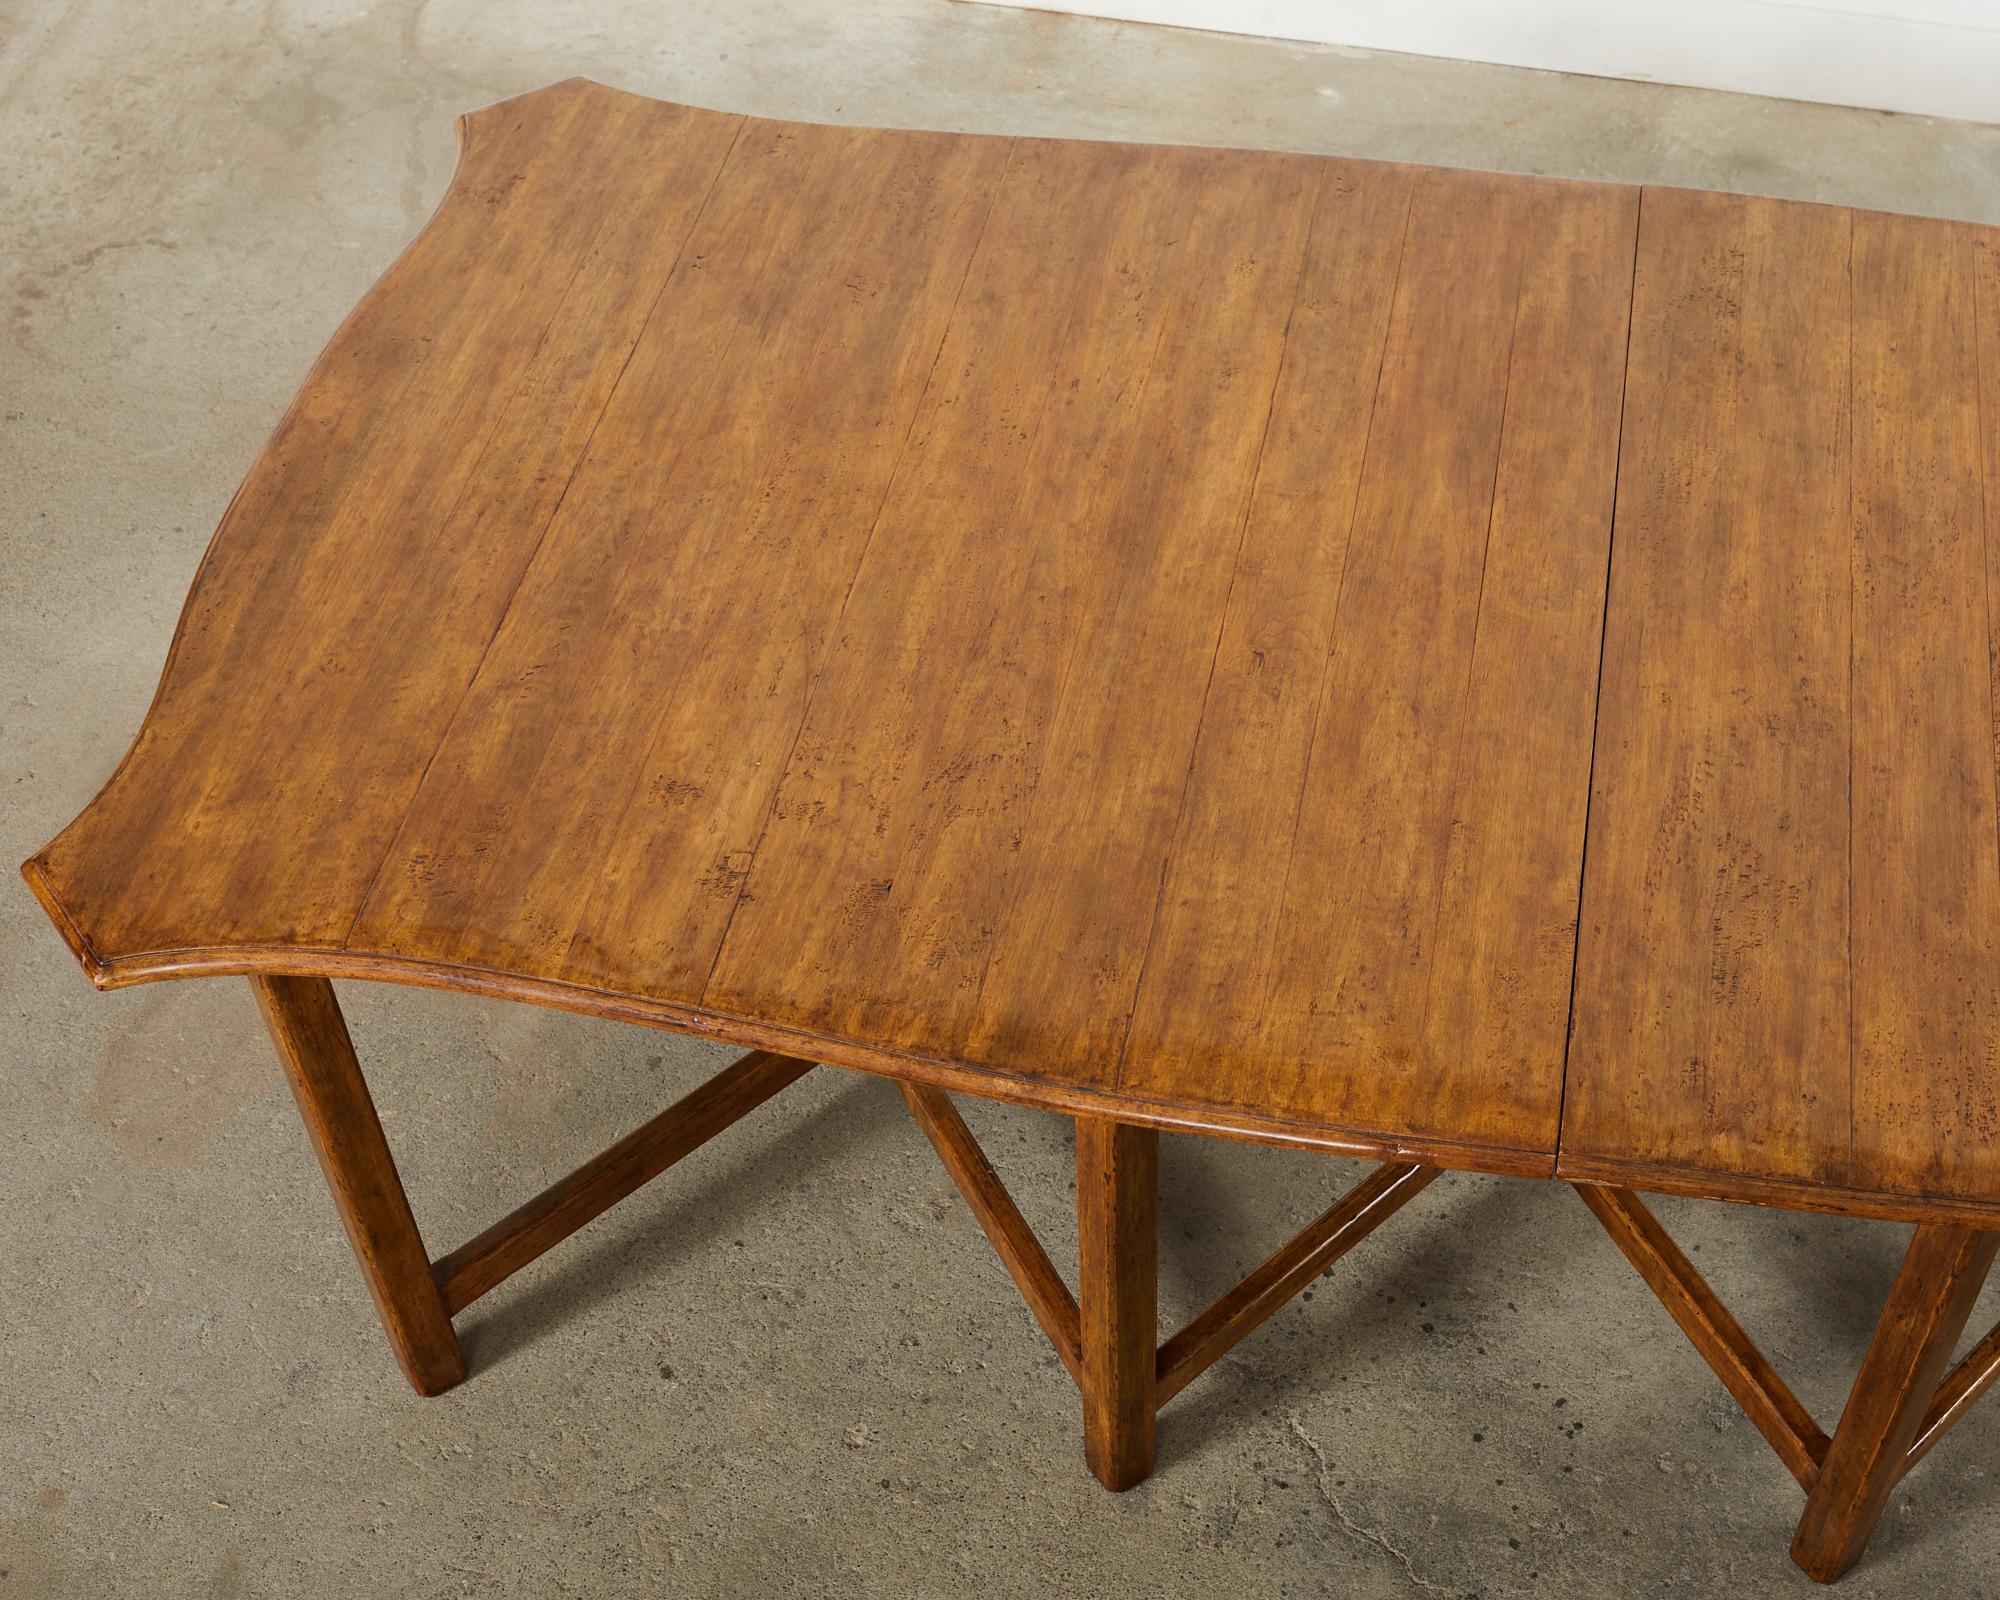 Dennis & Leen Distressed Walnut Tuscan Dining Table  In Distressed Condition In Rio Vista, CA